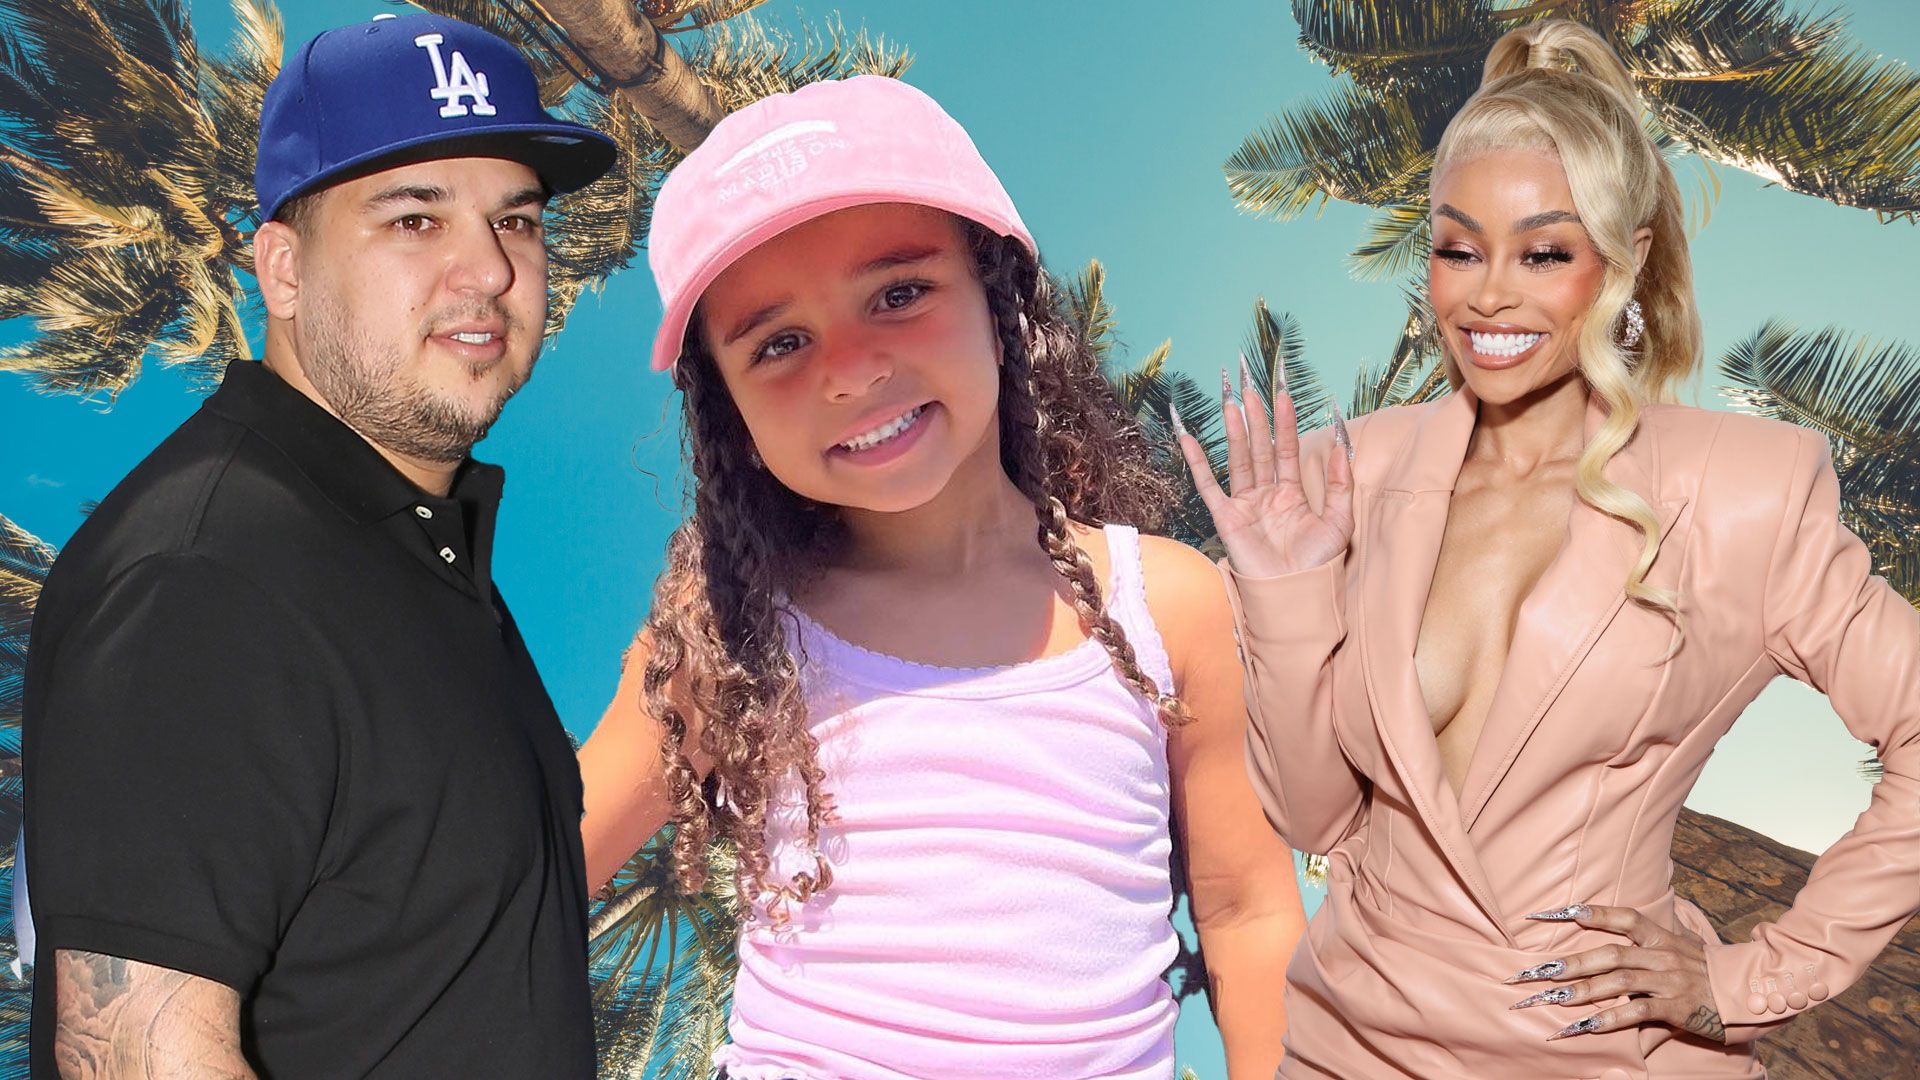 Rob Kardashian's 'love and positivity' approach to co-parenting daughter Dream with Blac Chyna